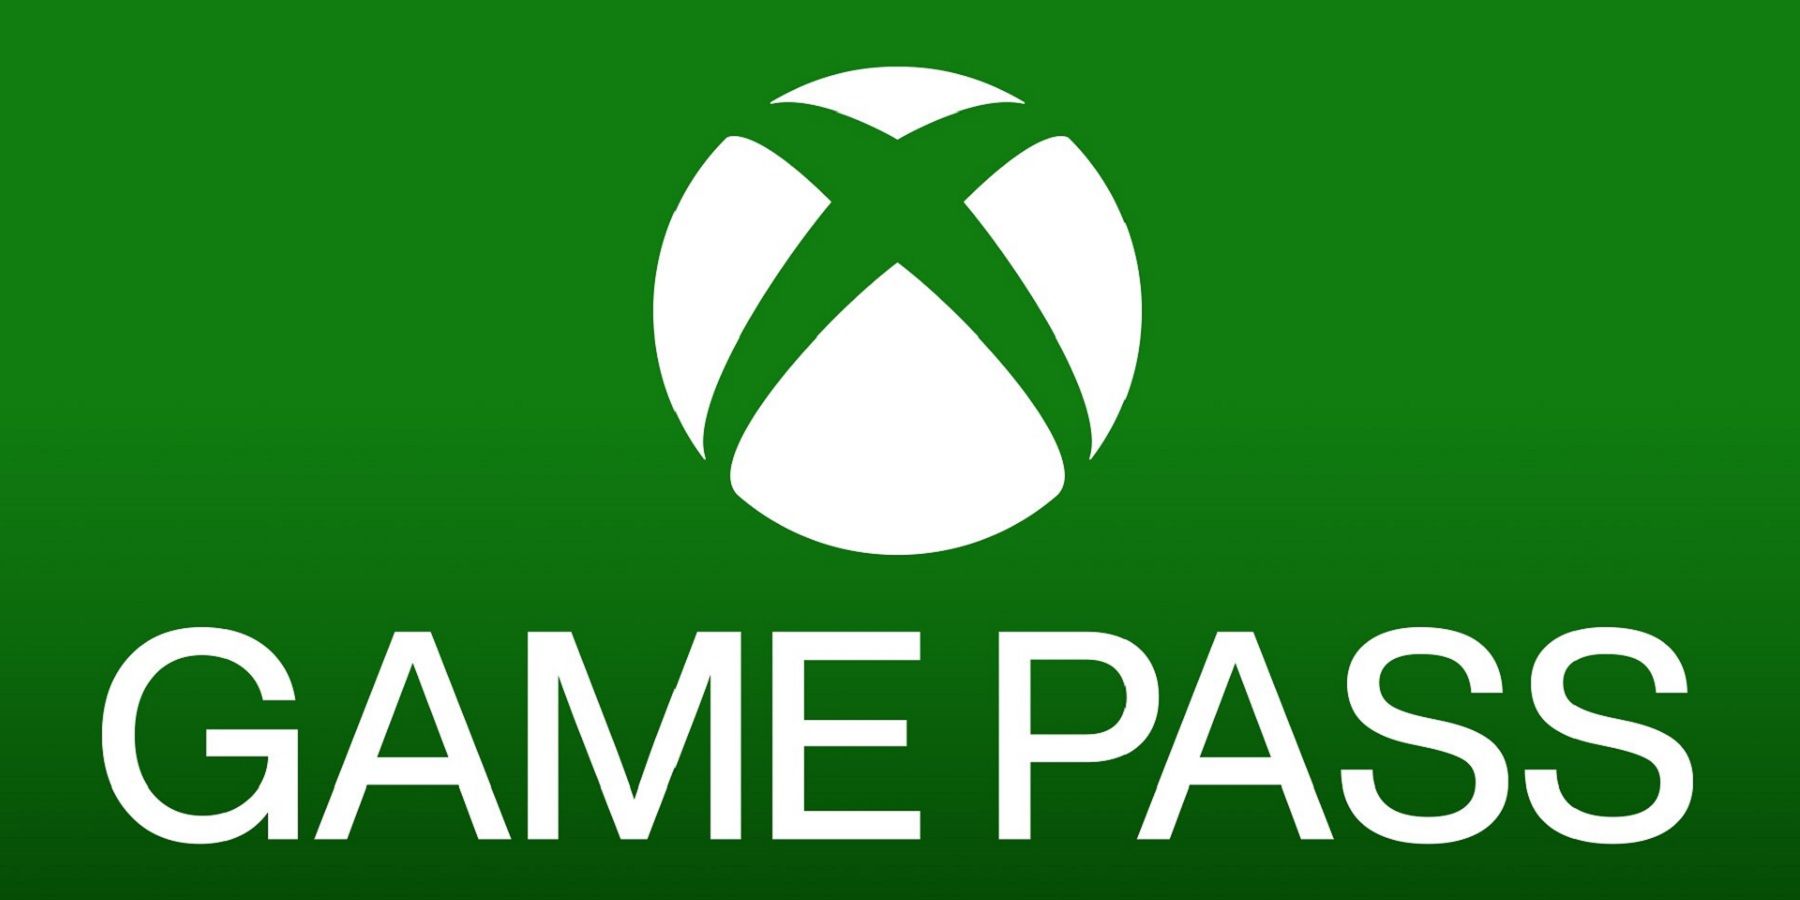 Xbox Game Pass: Check out these games coming this October